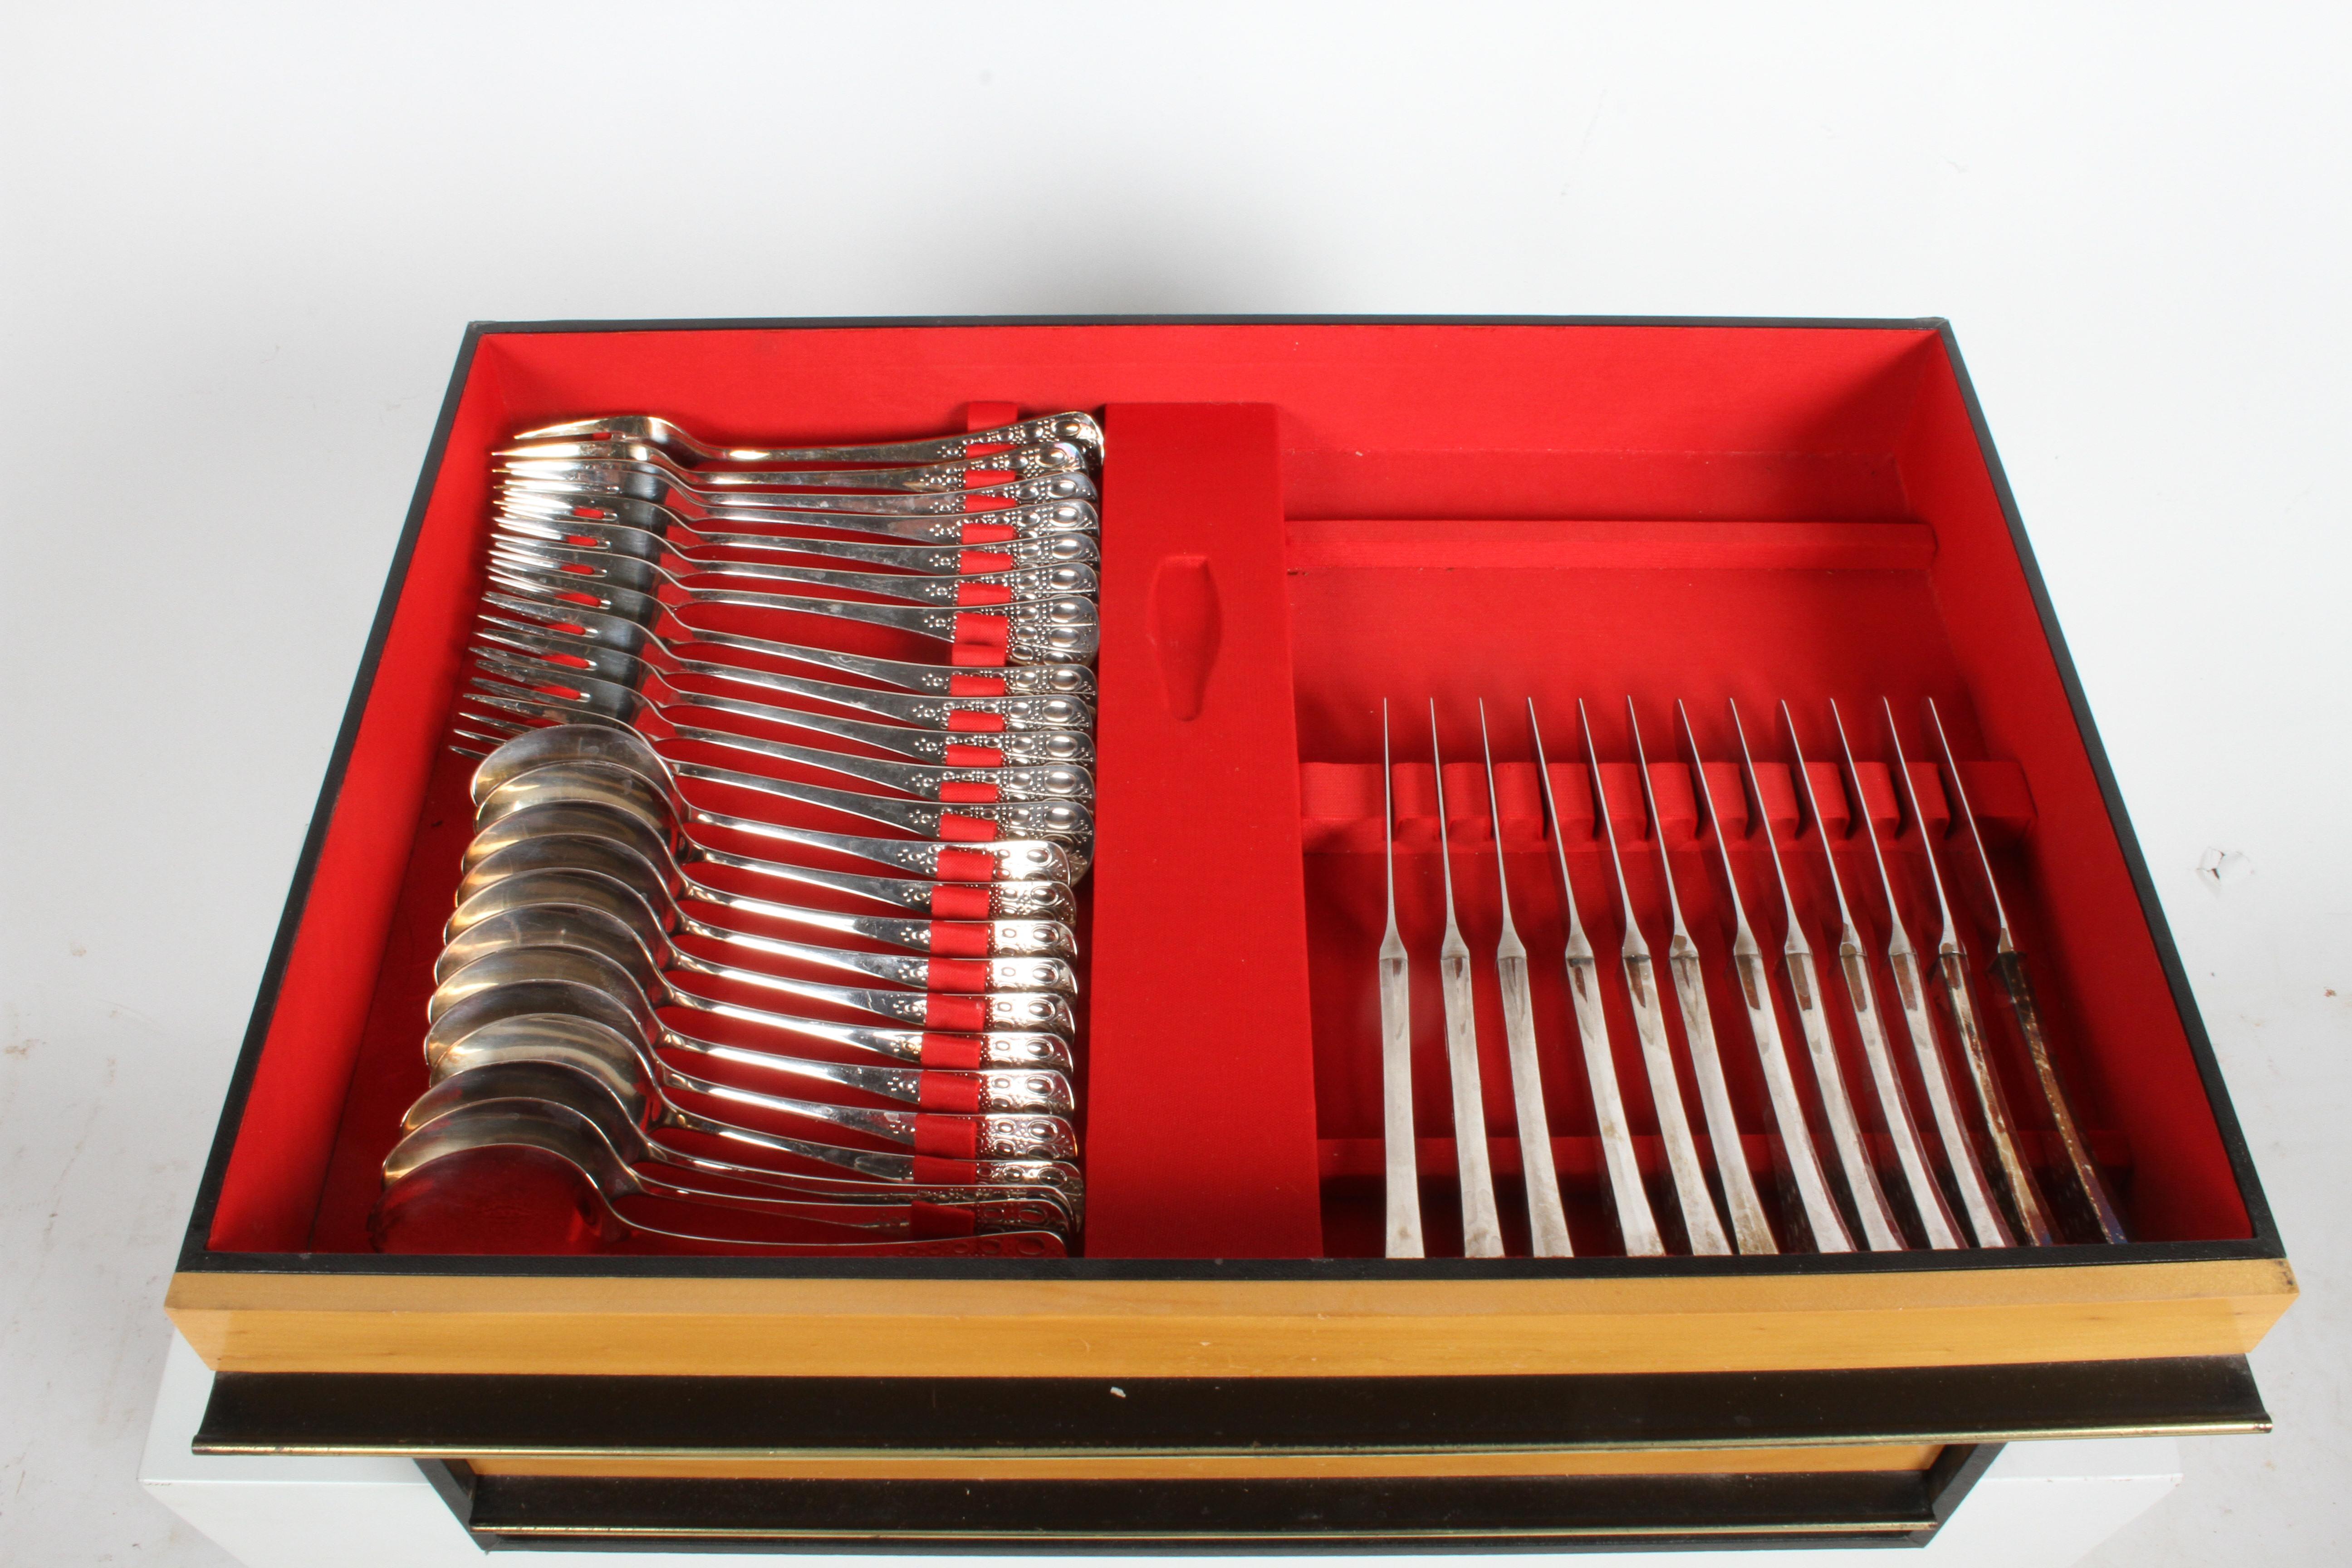 Romance, Bijorn Windblad Rosenthal Silverplate Flatware for 12 with Case 79 Pcs For Sale 2